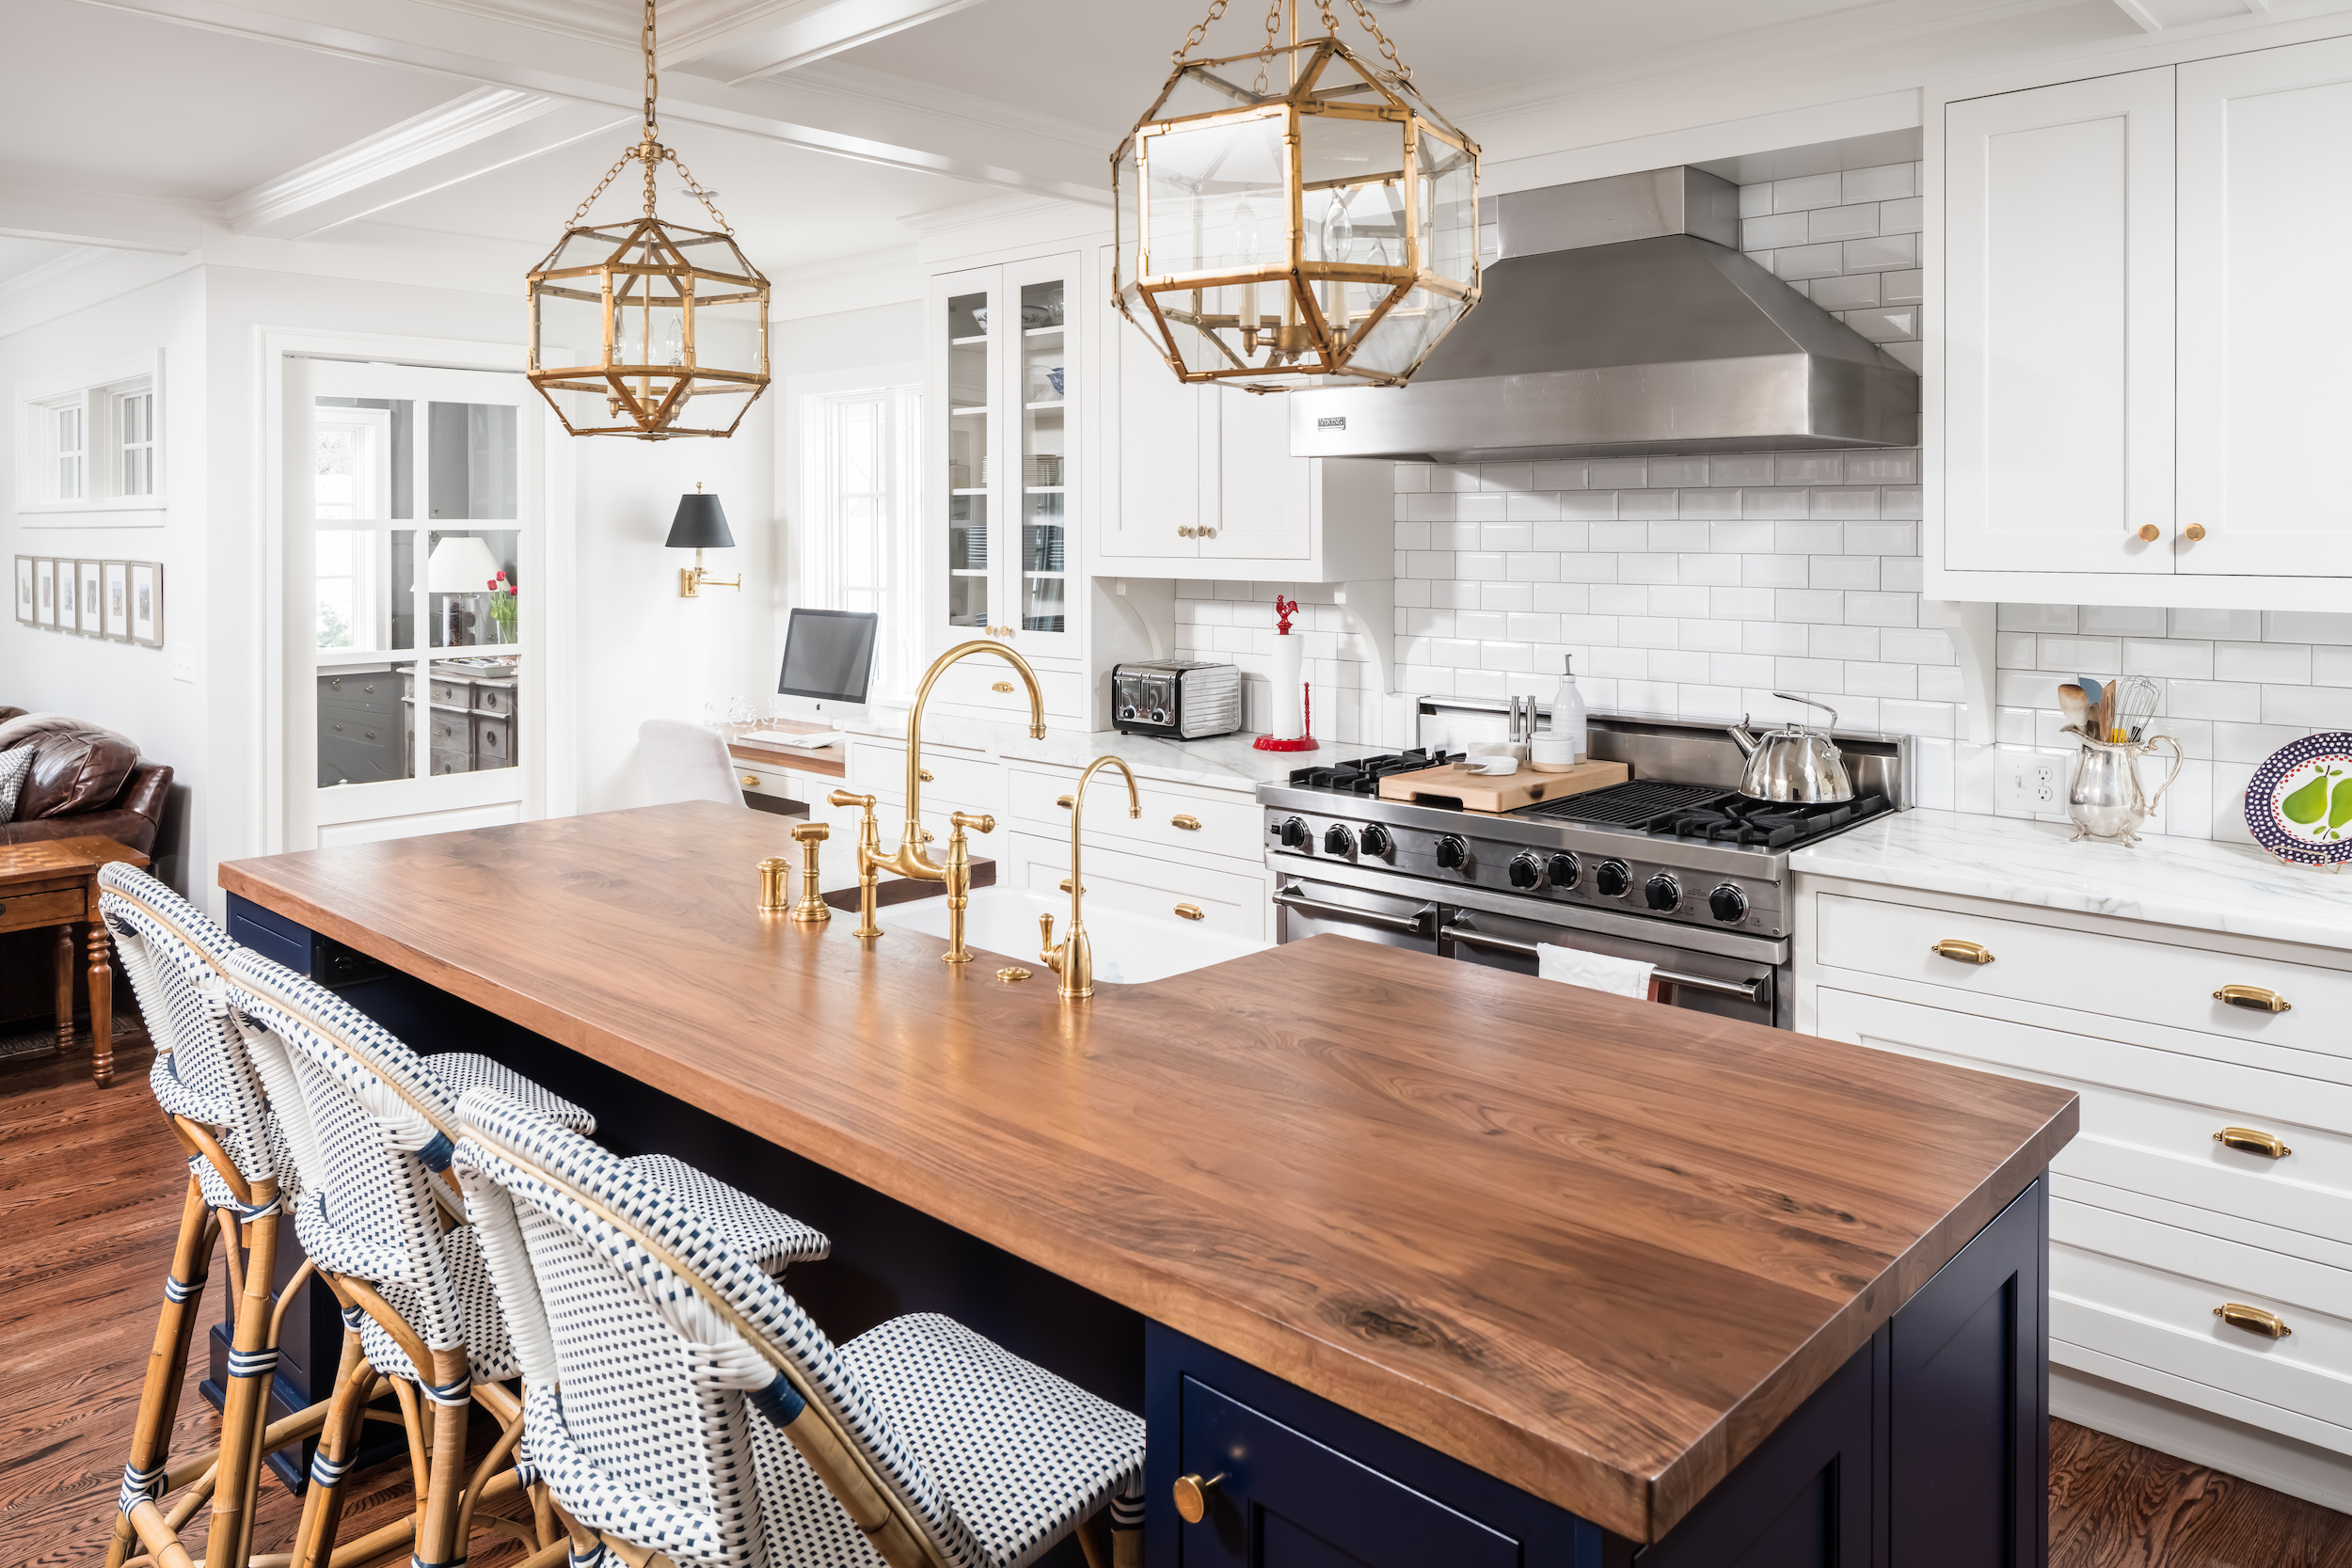 Luxury kitchen remodel and kitchen addition in colonial home. Traditional style, features island, butler's pantry, custom royal blue cabinetry and added family room.